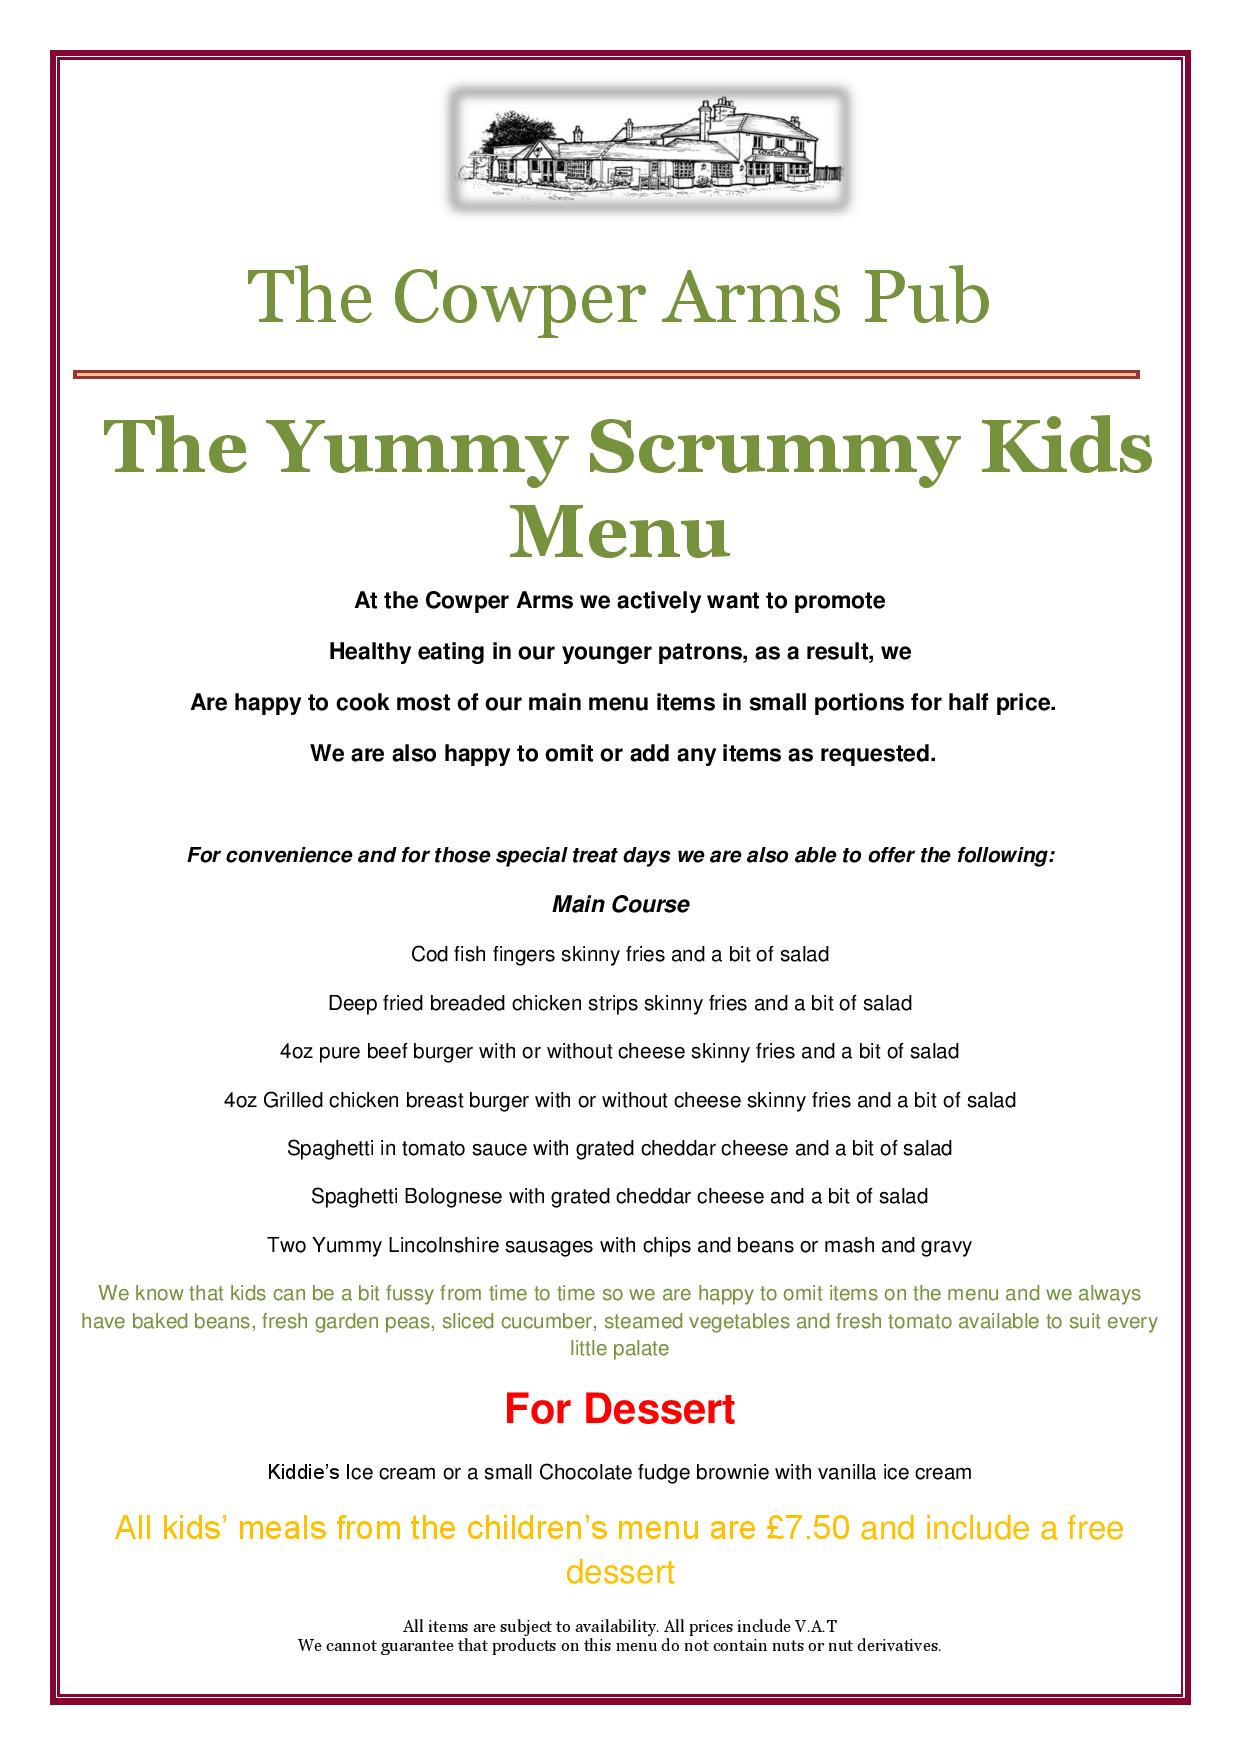 Children's Menu for the Cowper Arms, two courses including dessert for £7.50